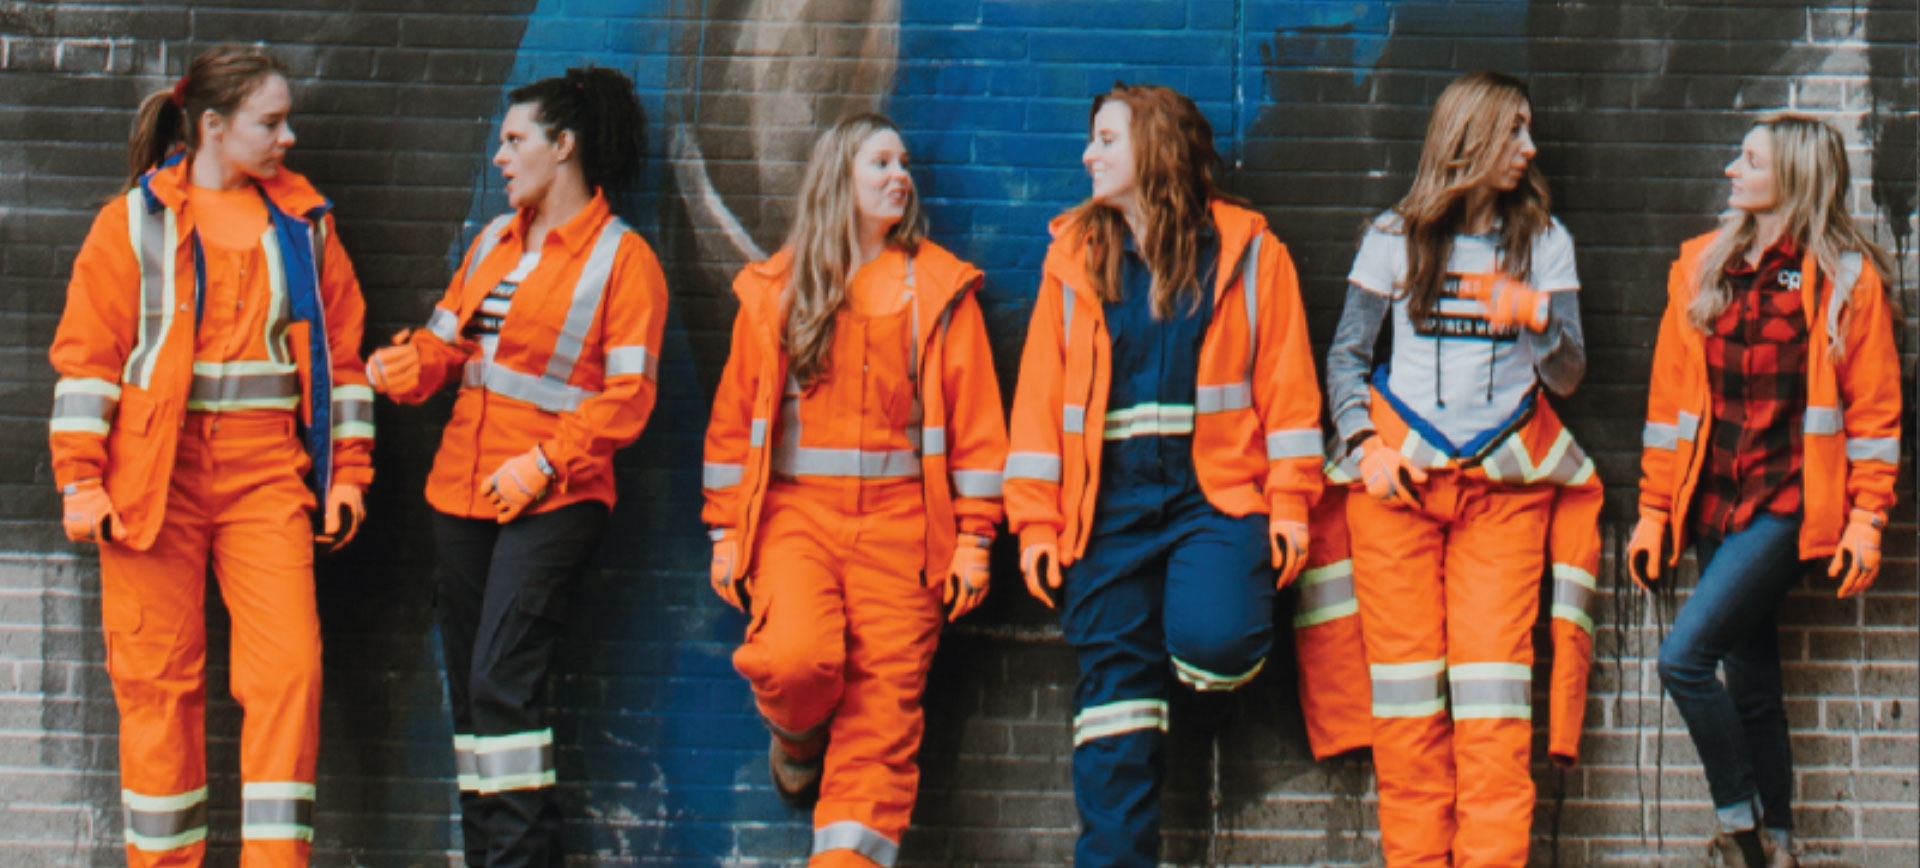 Covergalls Workwear is changing the game for women in the construction industry